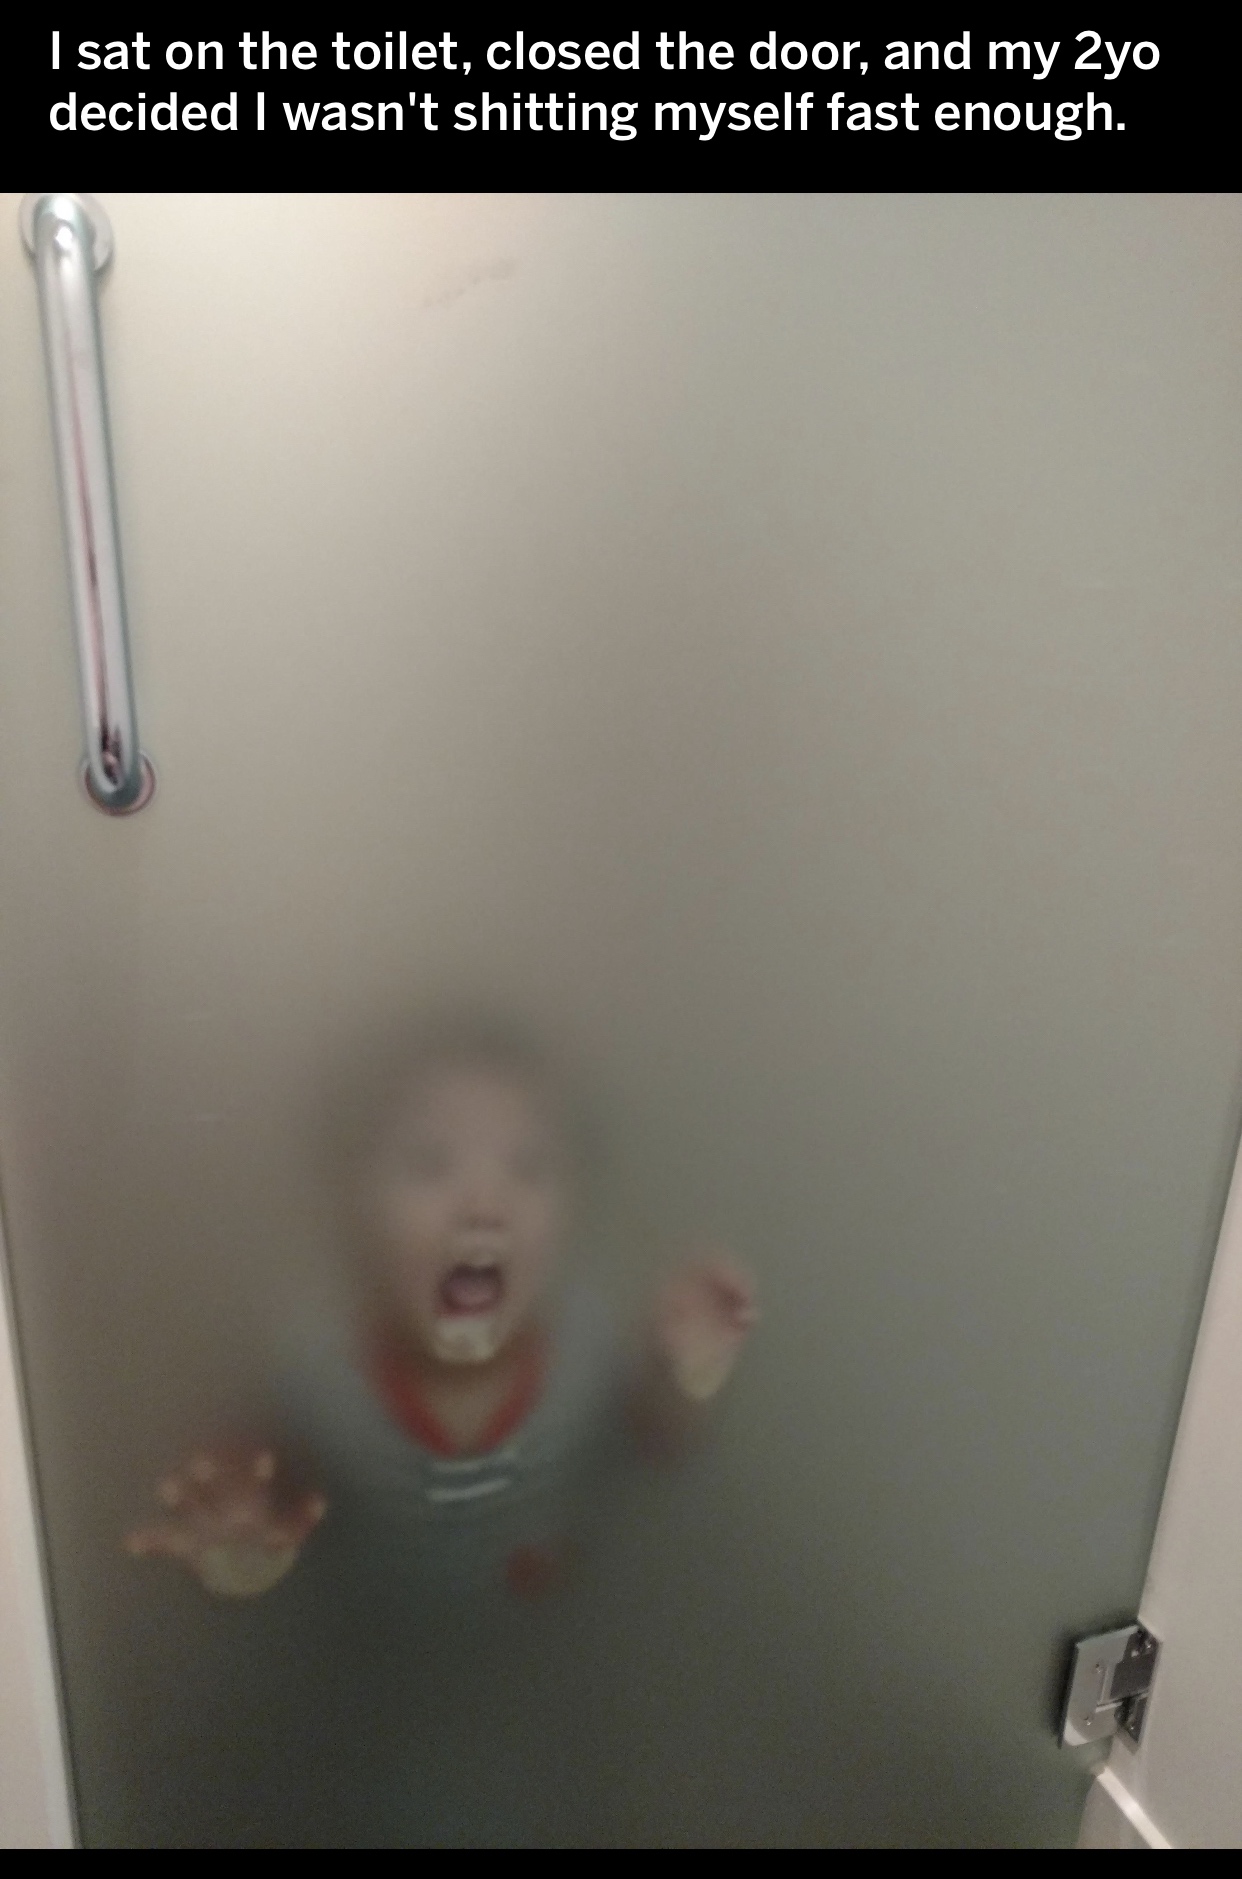 mouth - I sat on the toilet, closed the door, and my 2 yo decided I wasn't shitting myself fast enough.